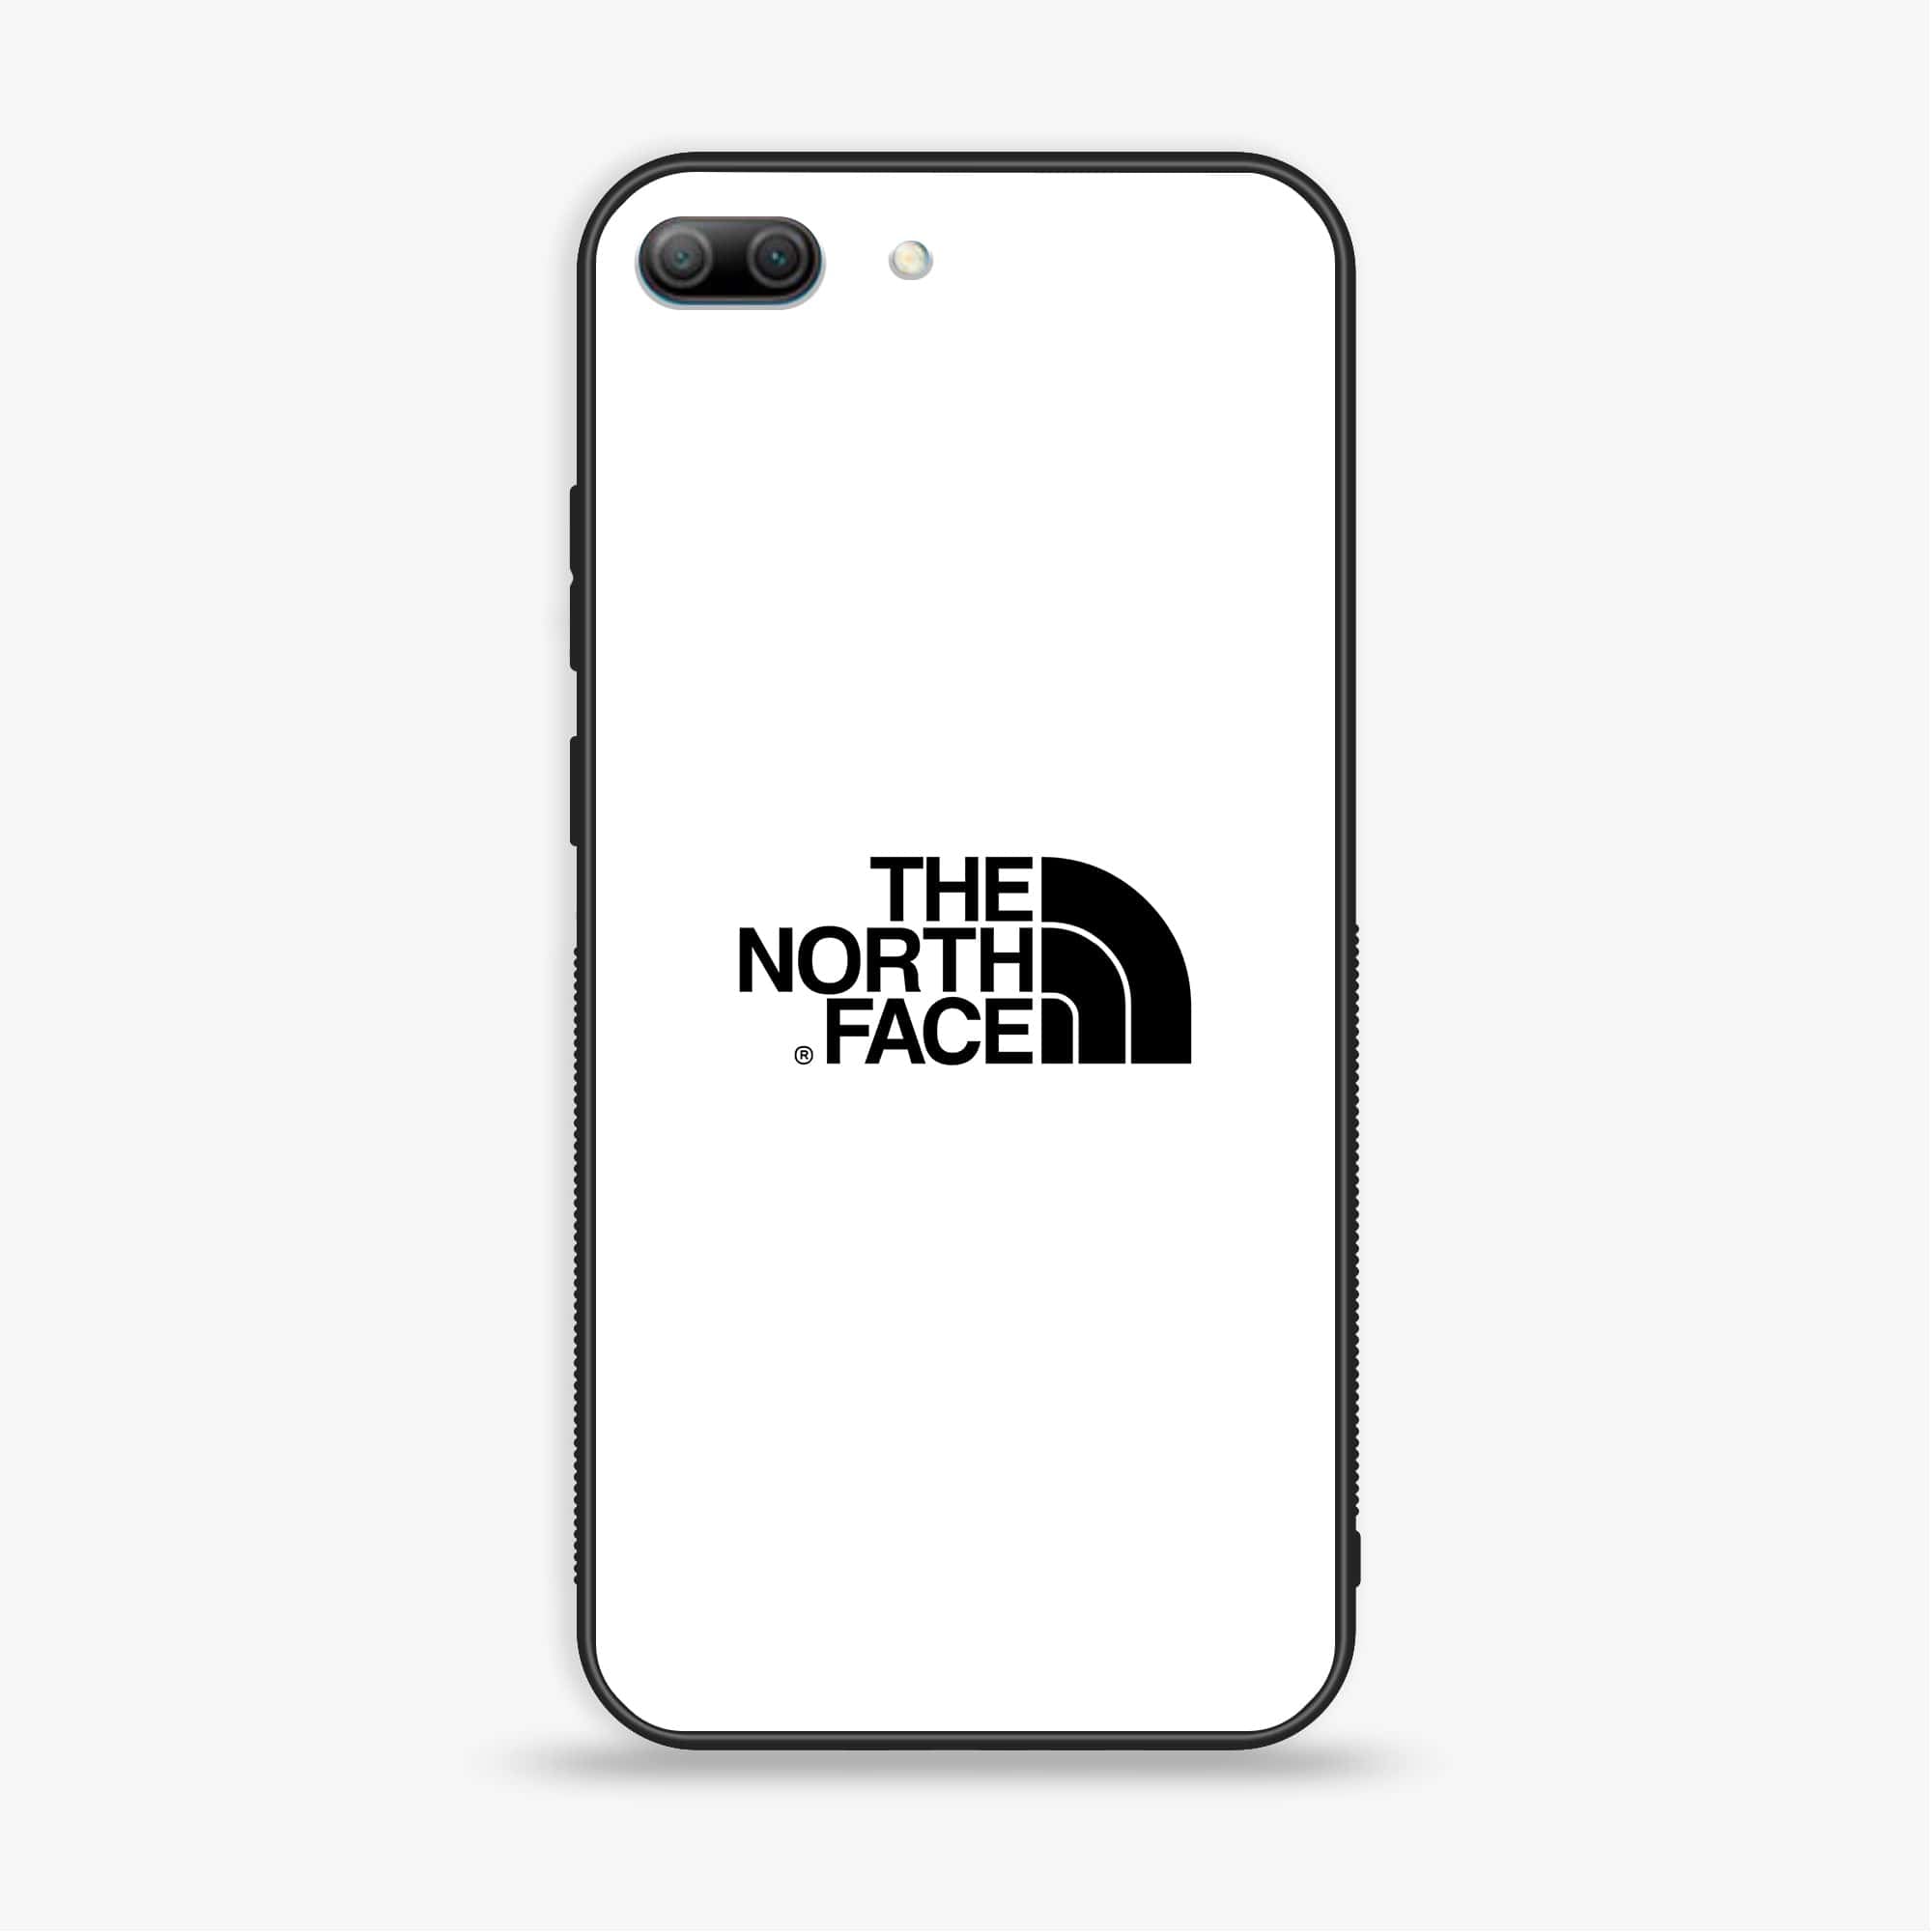 Huawei Honor 9 Lite - The North Face Series - Premium Printed Glass soft Bumper shock Proof Case